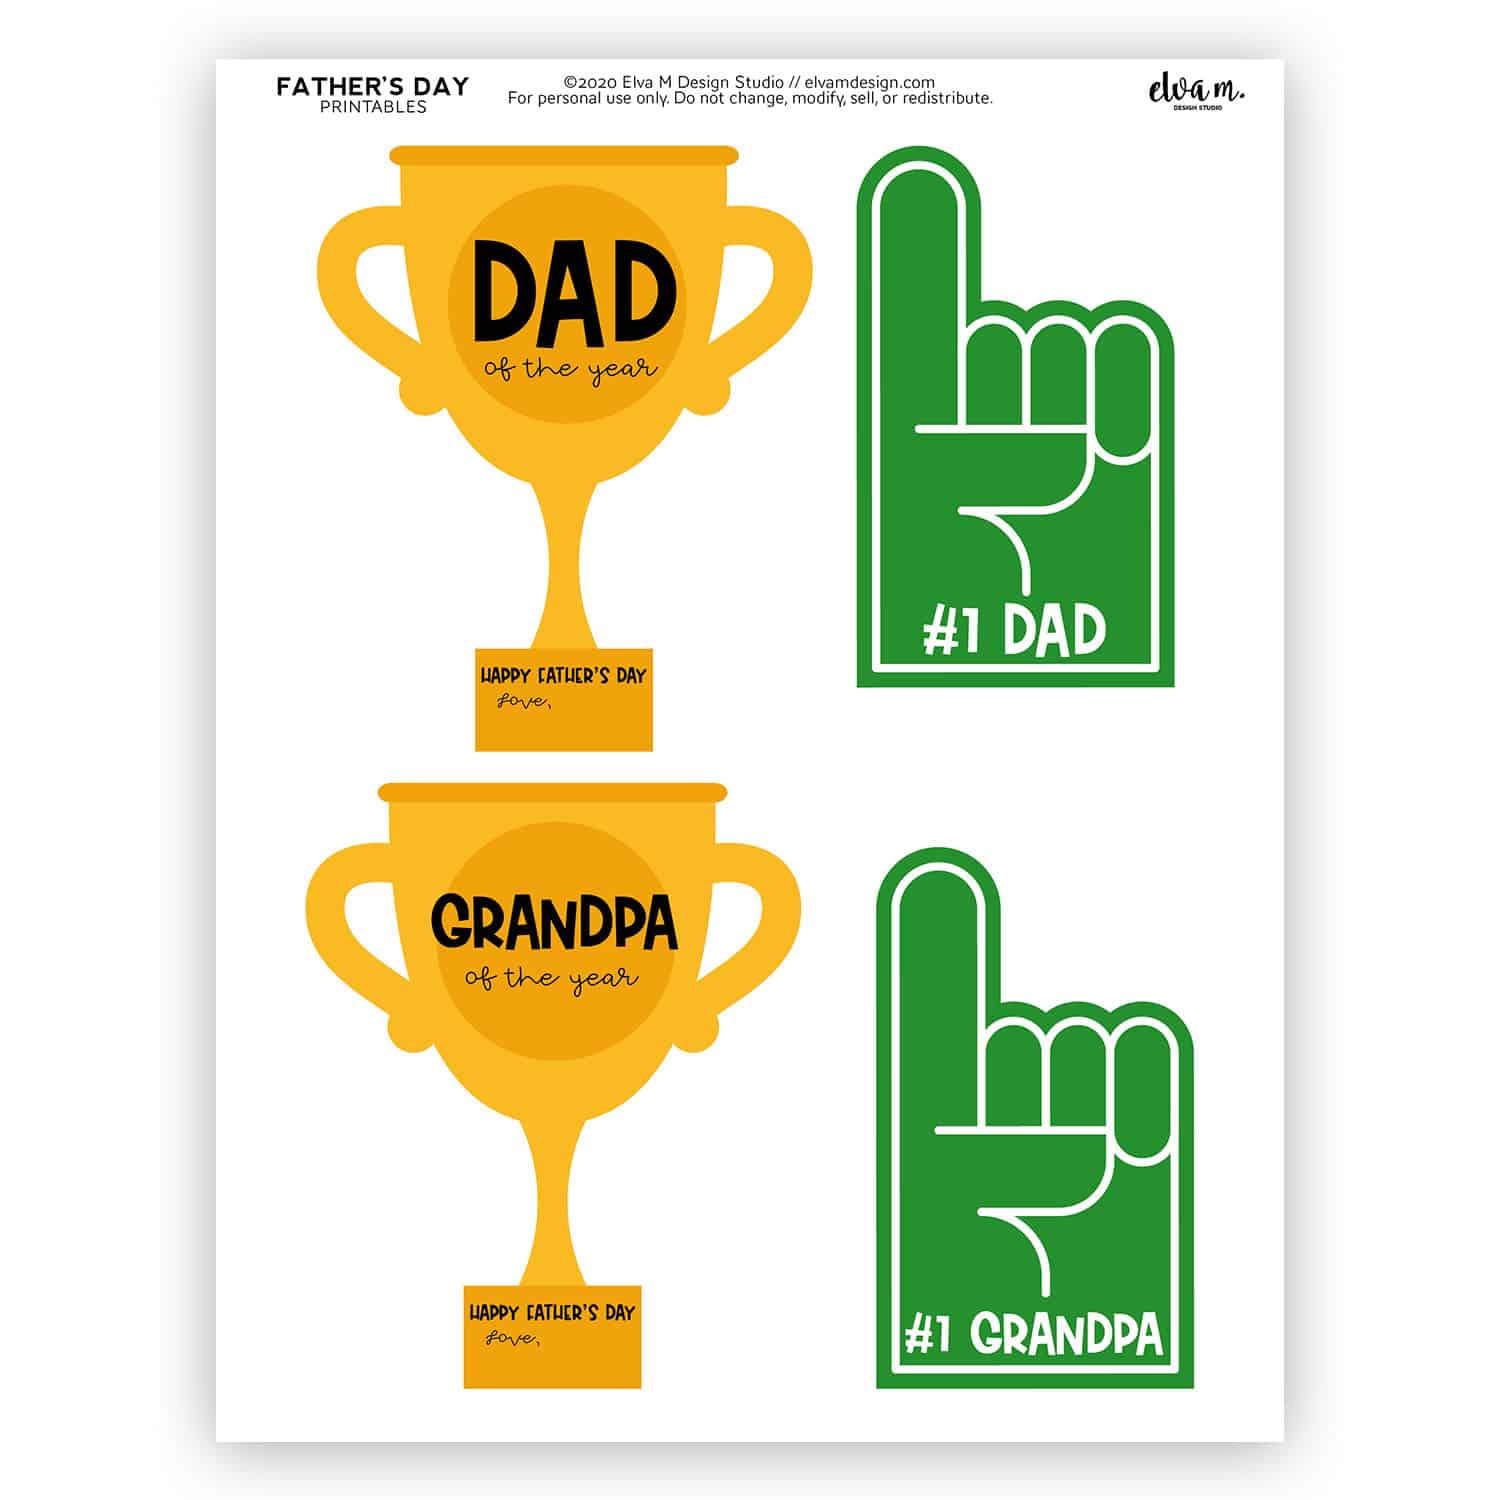 Celebrate Your #1 Dad – Father’s Day Printables